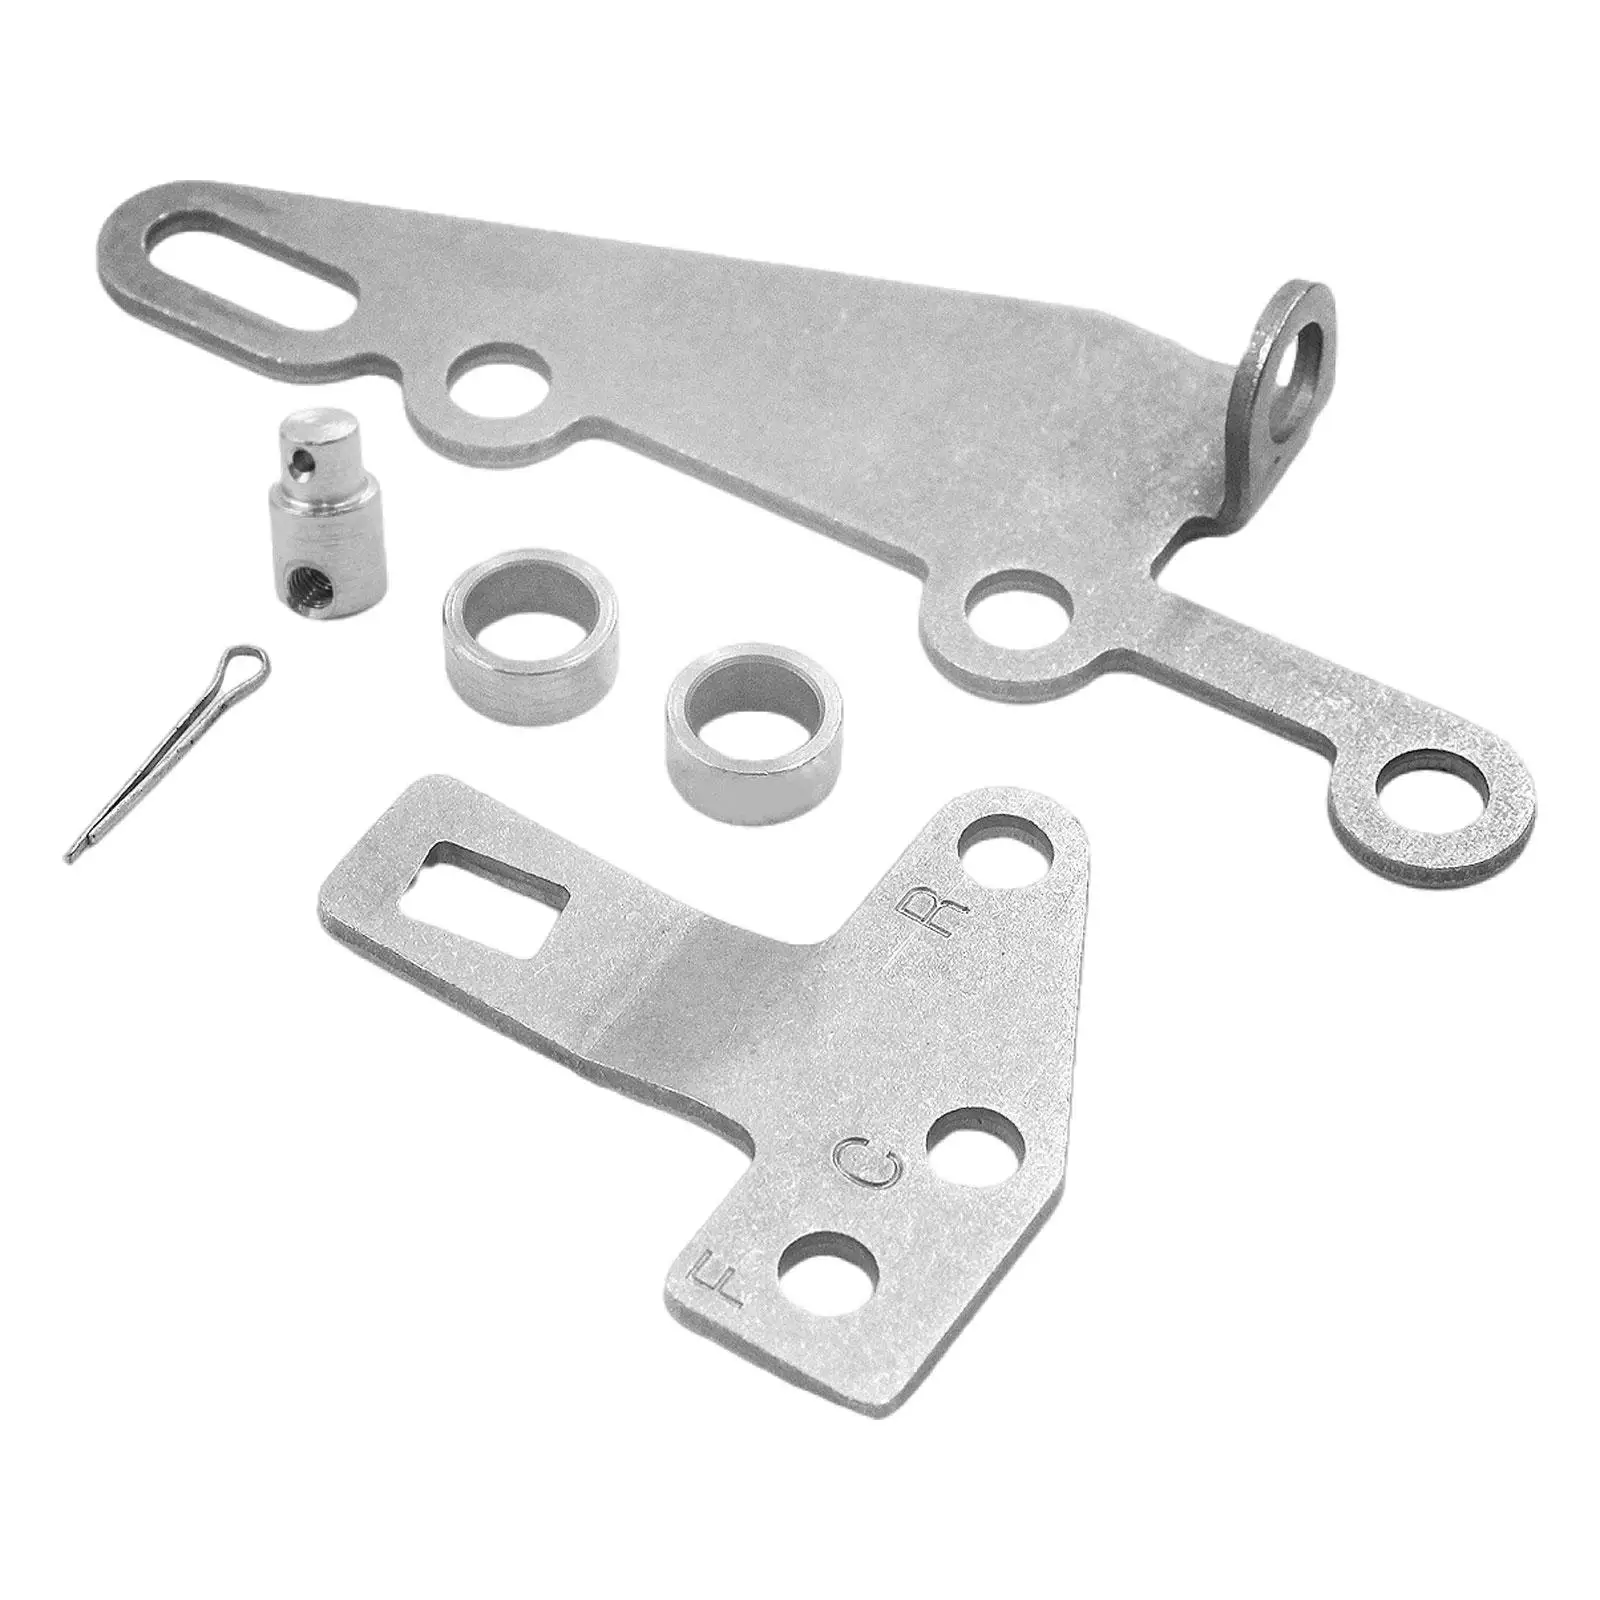 Shifter Bracket Kit 35498 for TH400 TH350 TH200-4R Accessories Stable Performance Easy Installation